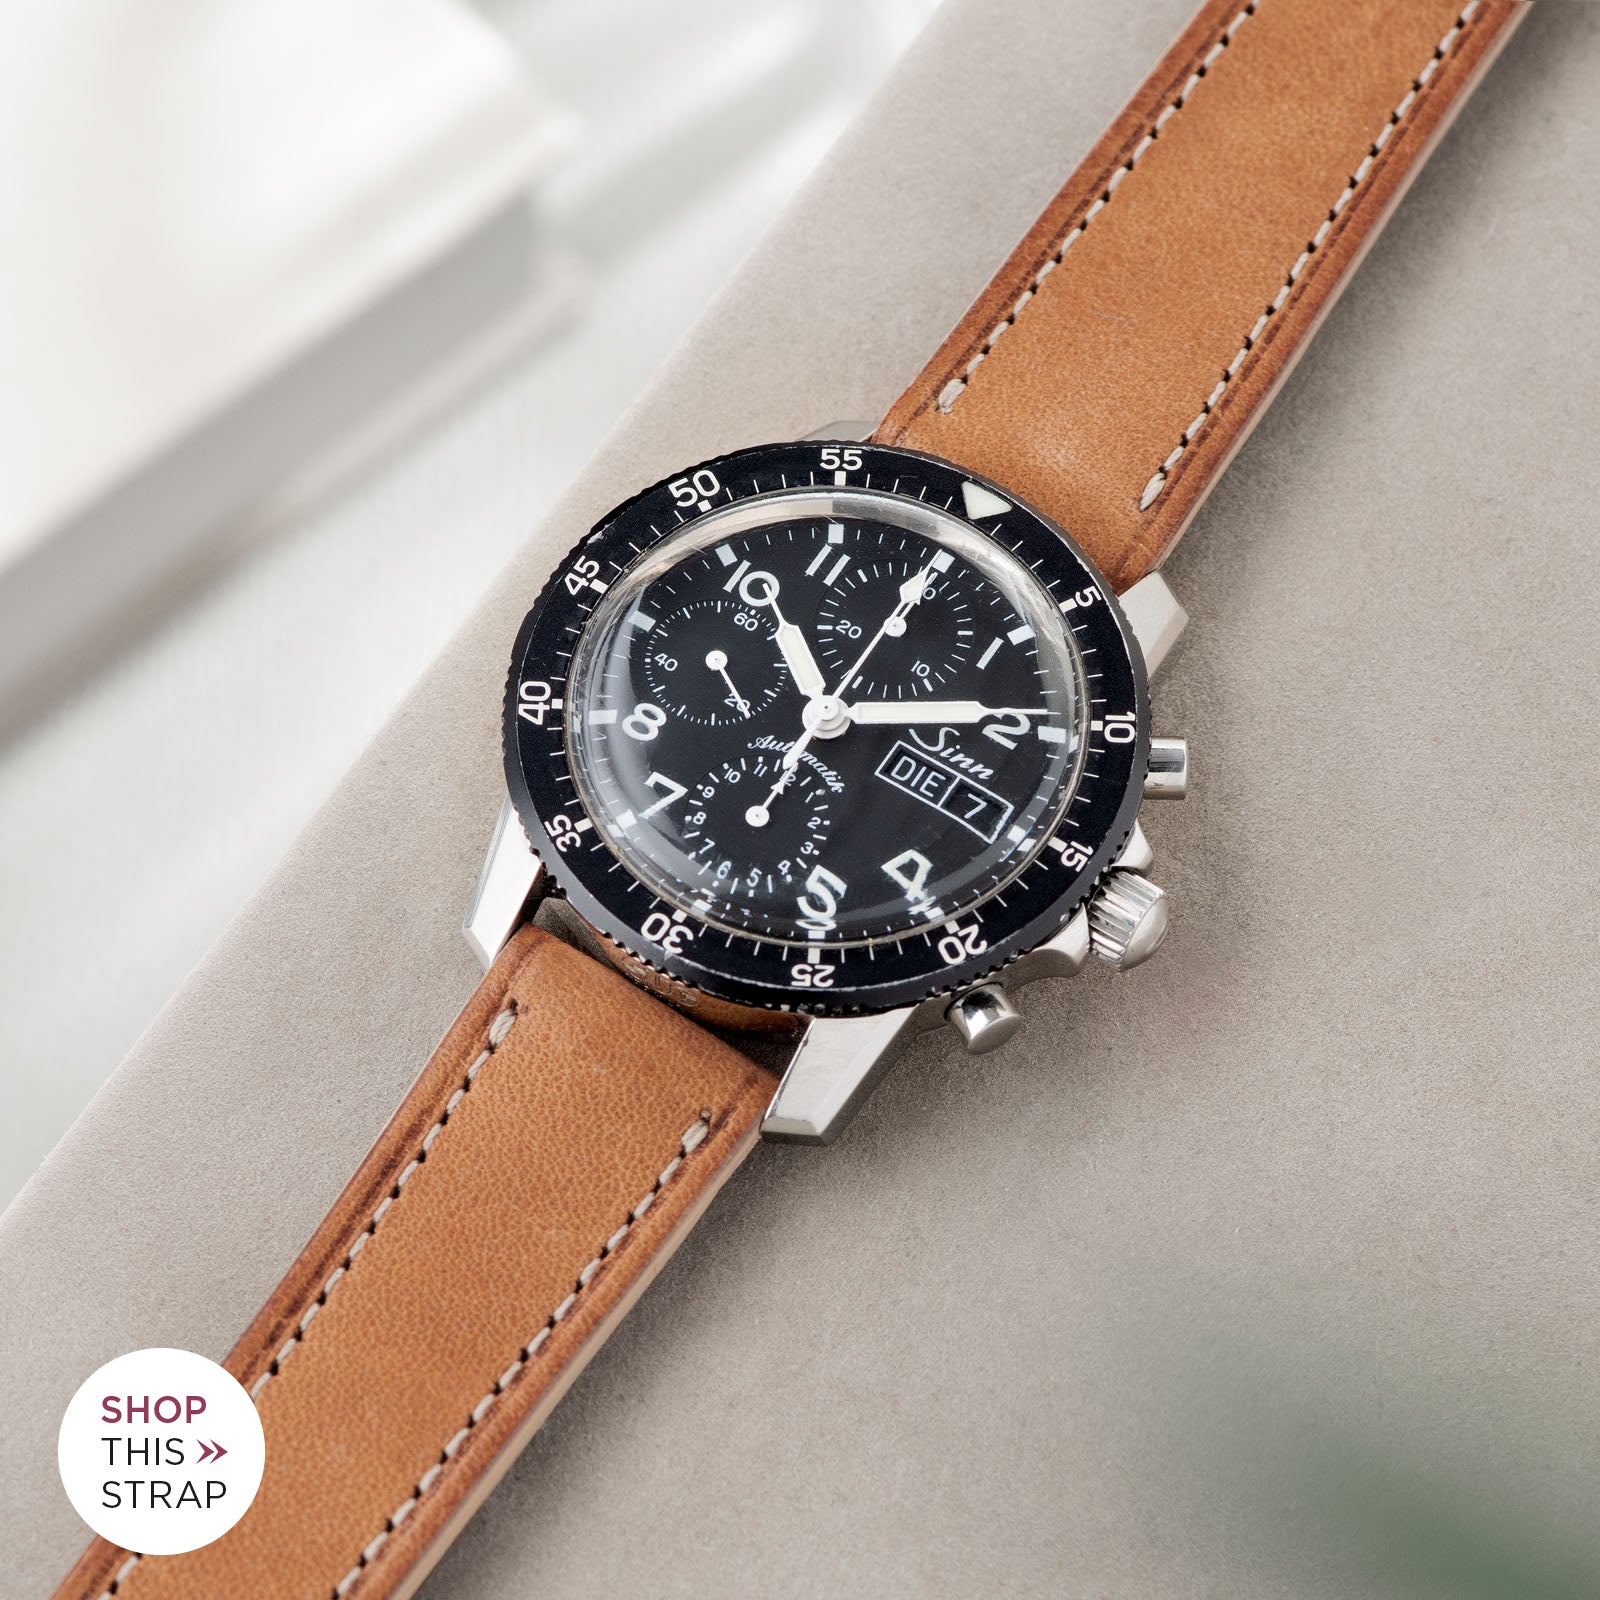 Bulang and Sons_Strap Guide_Sinn 103St Flieder Chronograph_Cosaro Brown Retro Leather Watch Strap